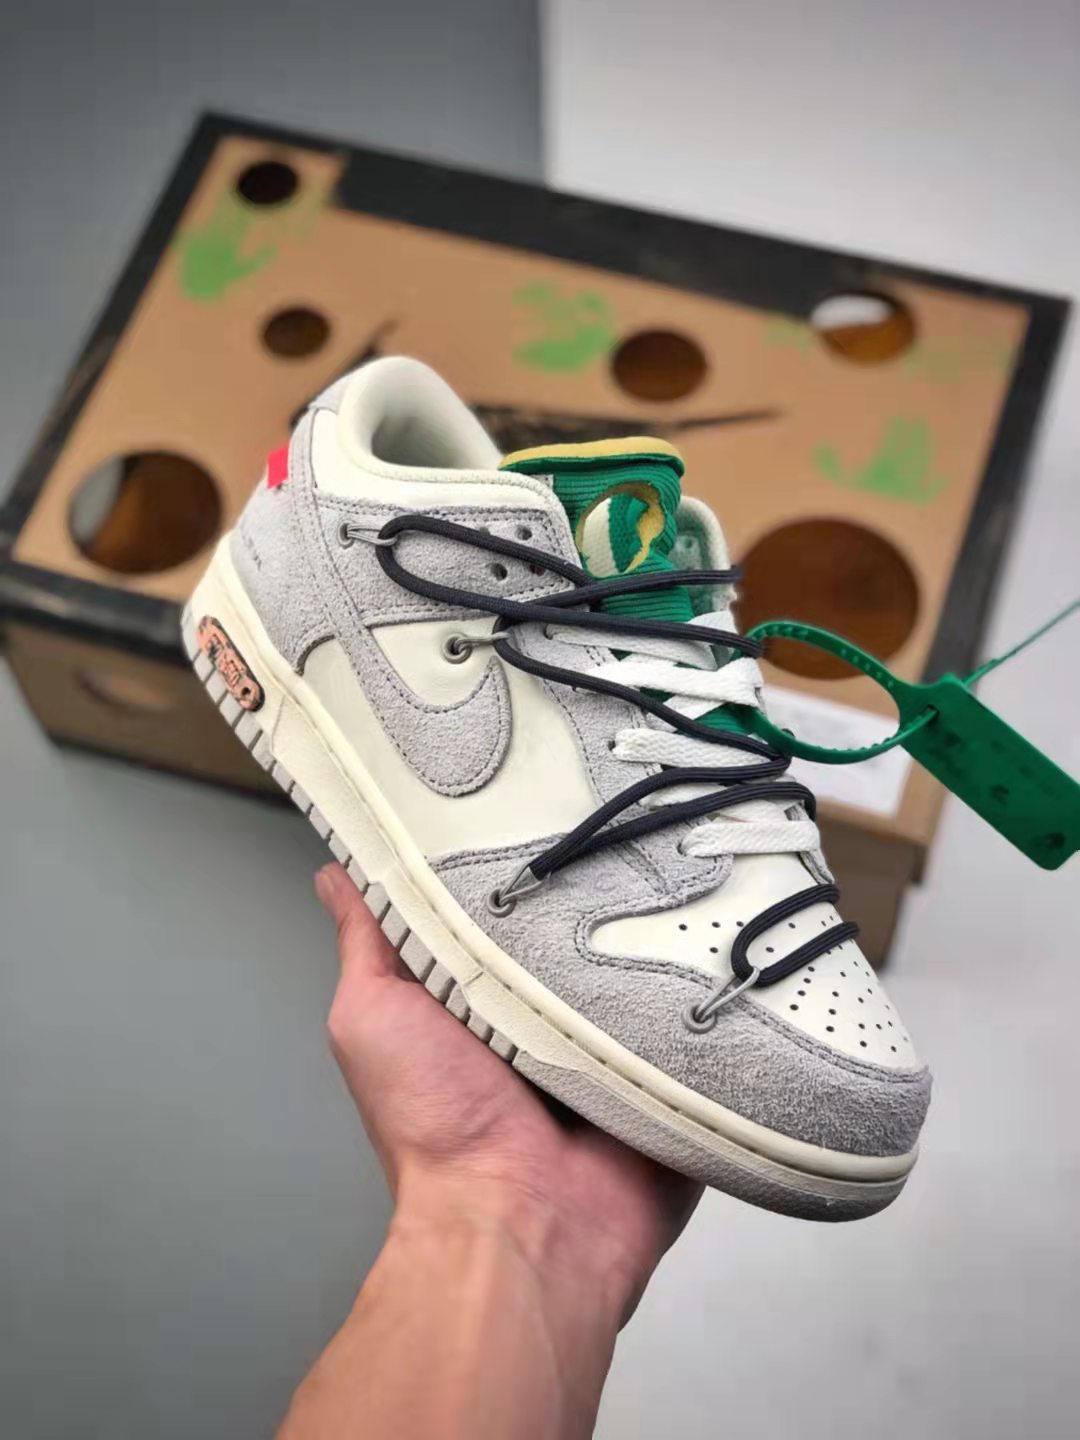 Nike Off-White x Dunk Low 'Lot 20 of 50' DJ0950-115 - Limited Edition Collaboration